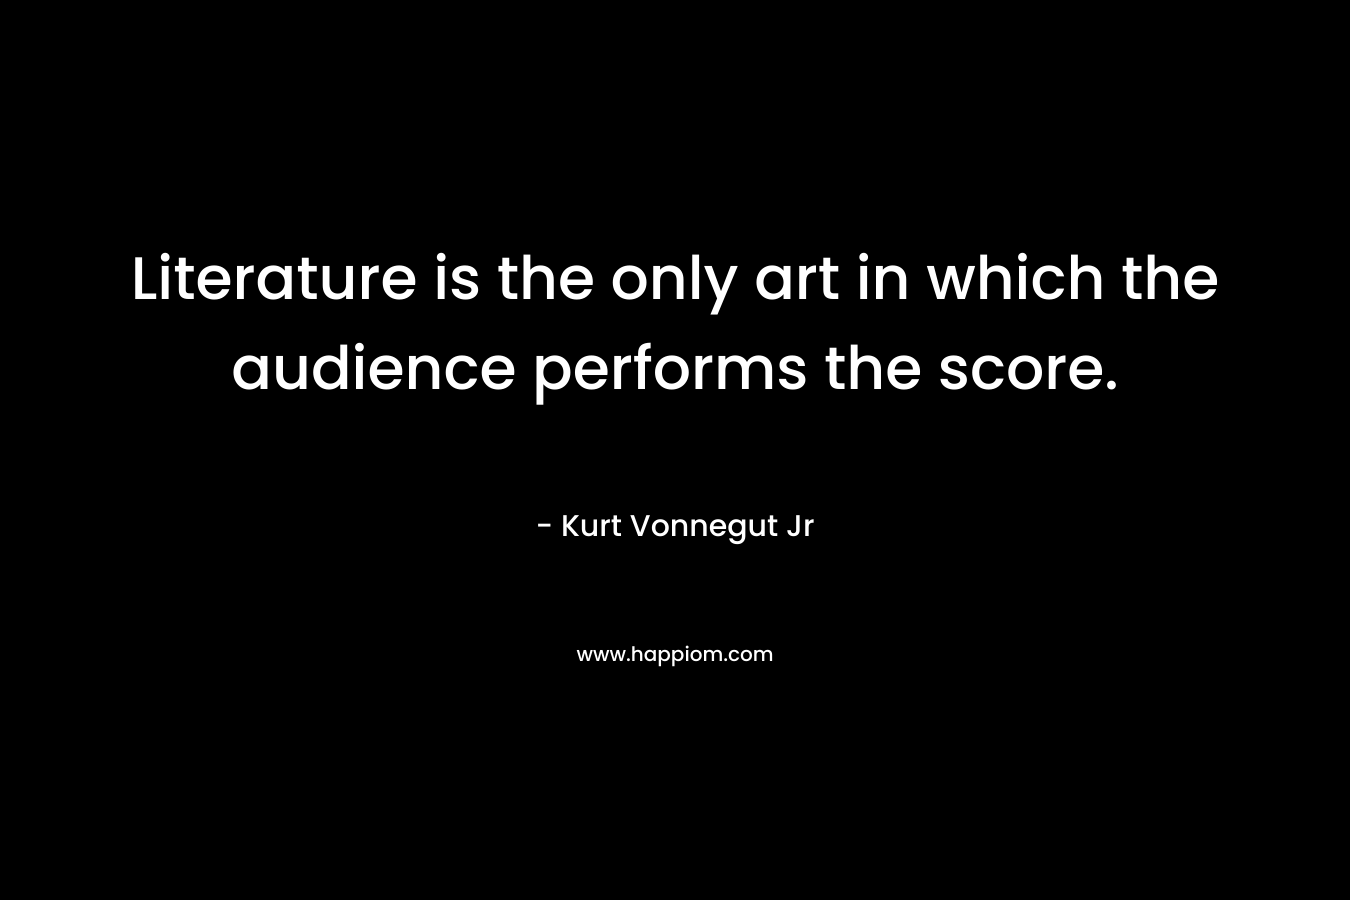 Literature is the only art in which the audience performs the score.